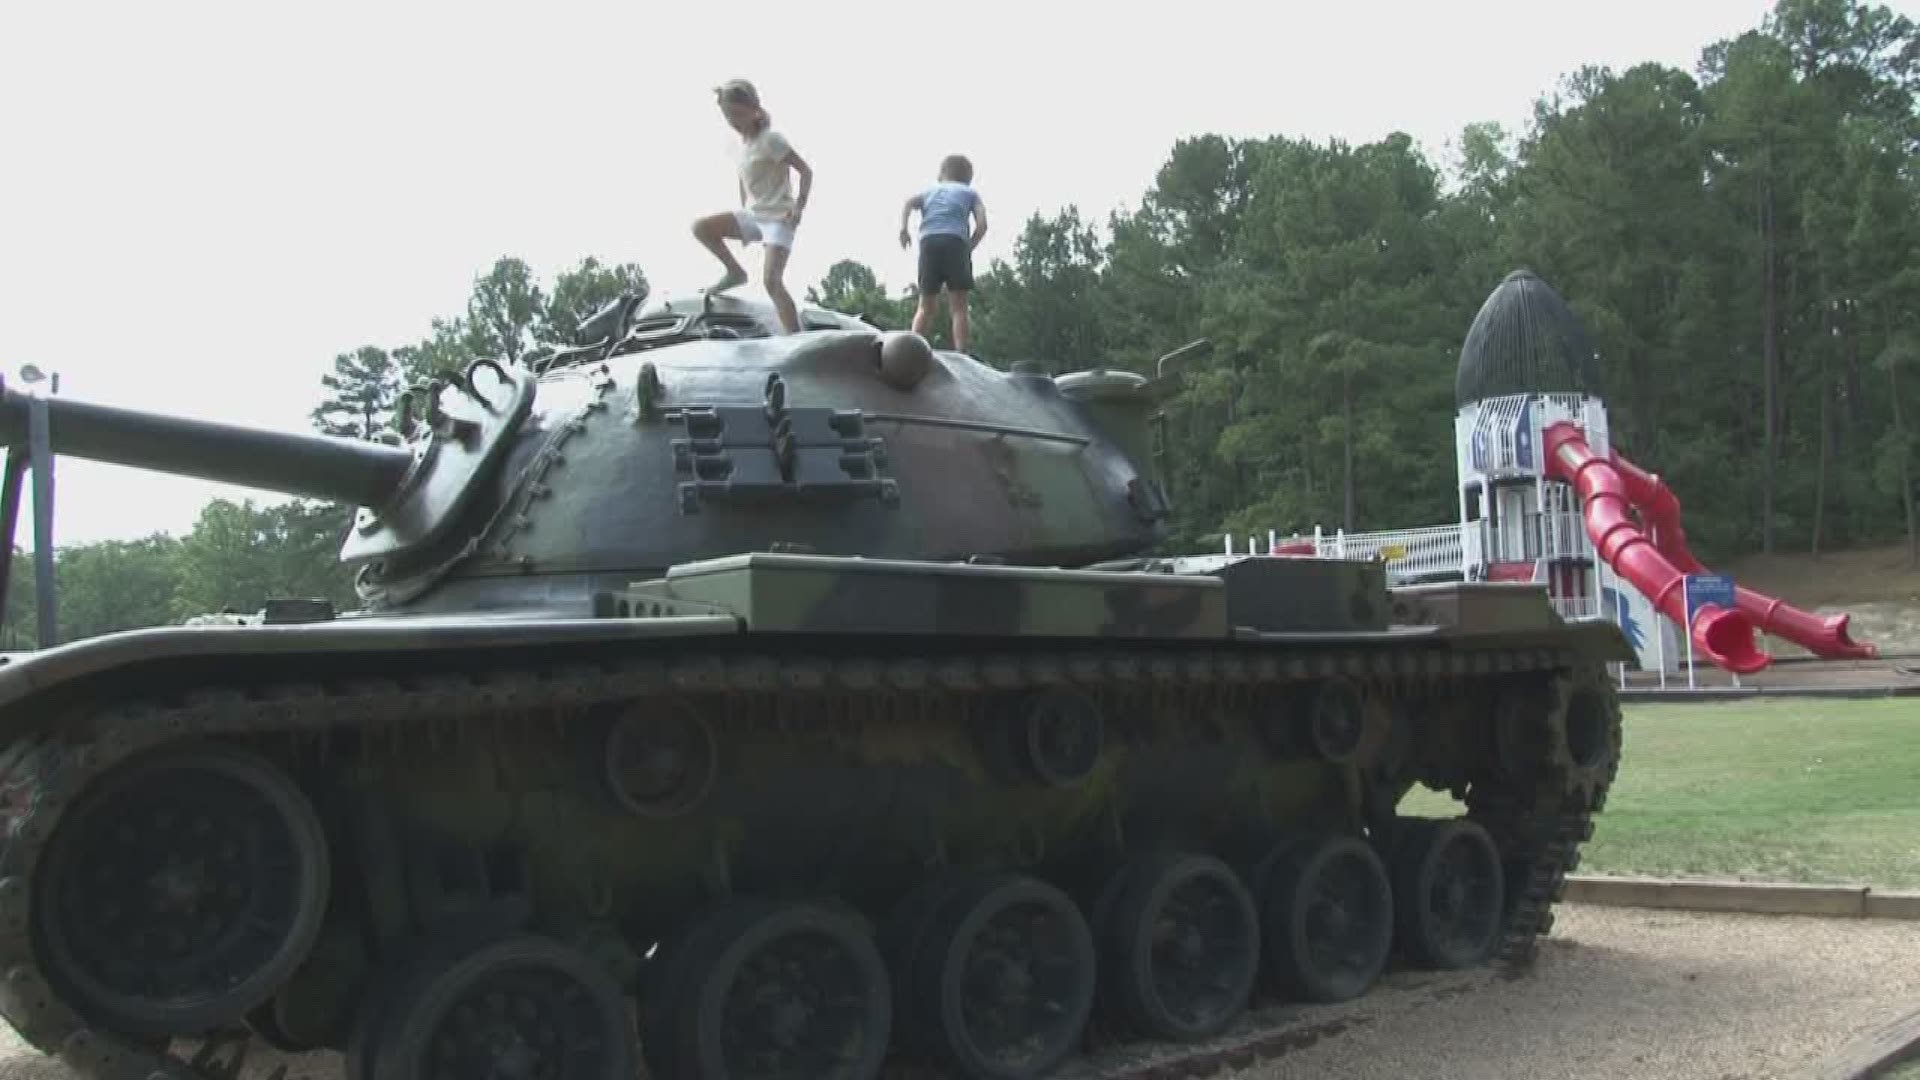 The tank has been on loan from the Arkansas National Guard, but now it's being removed for maintenance.